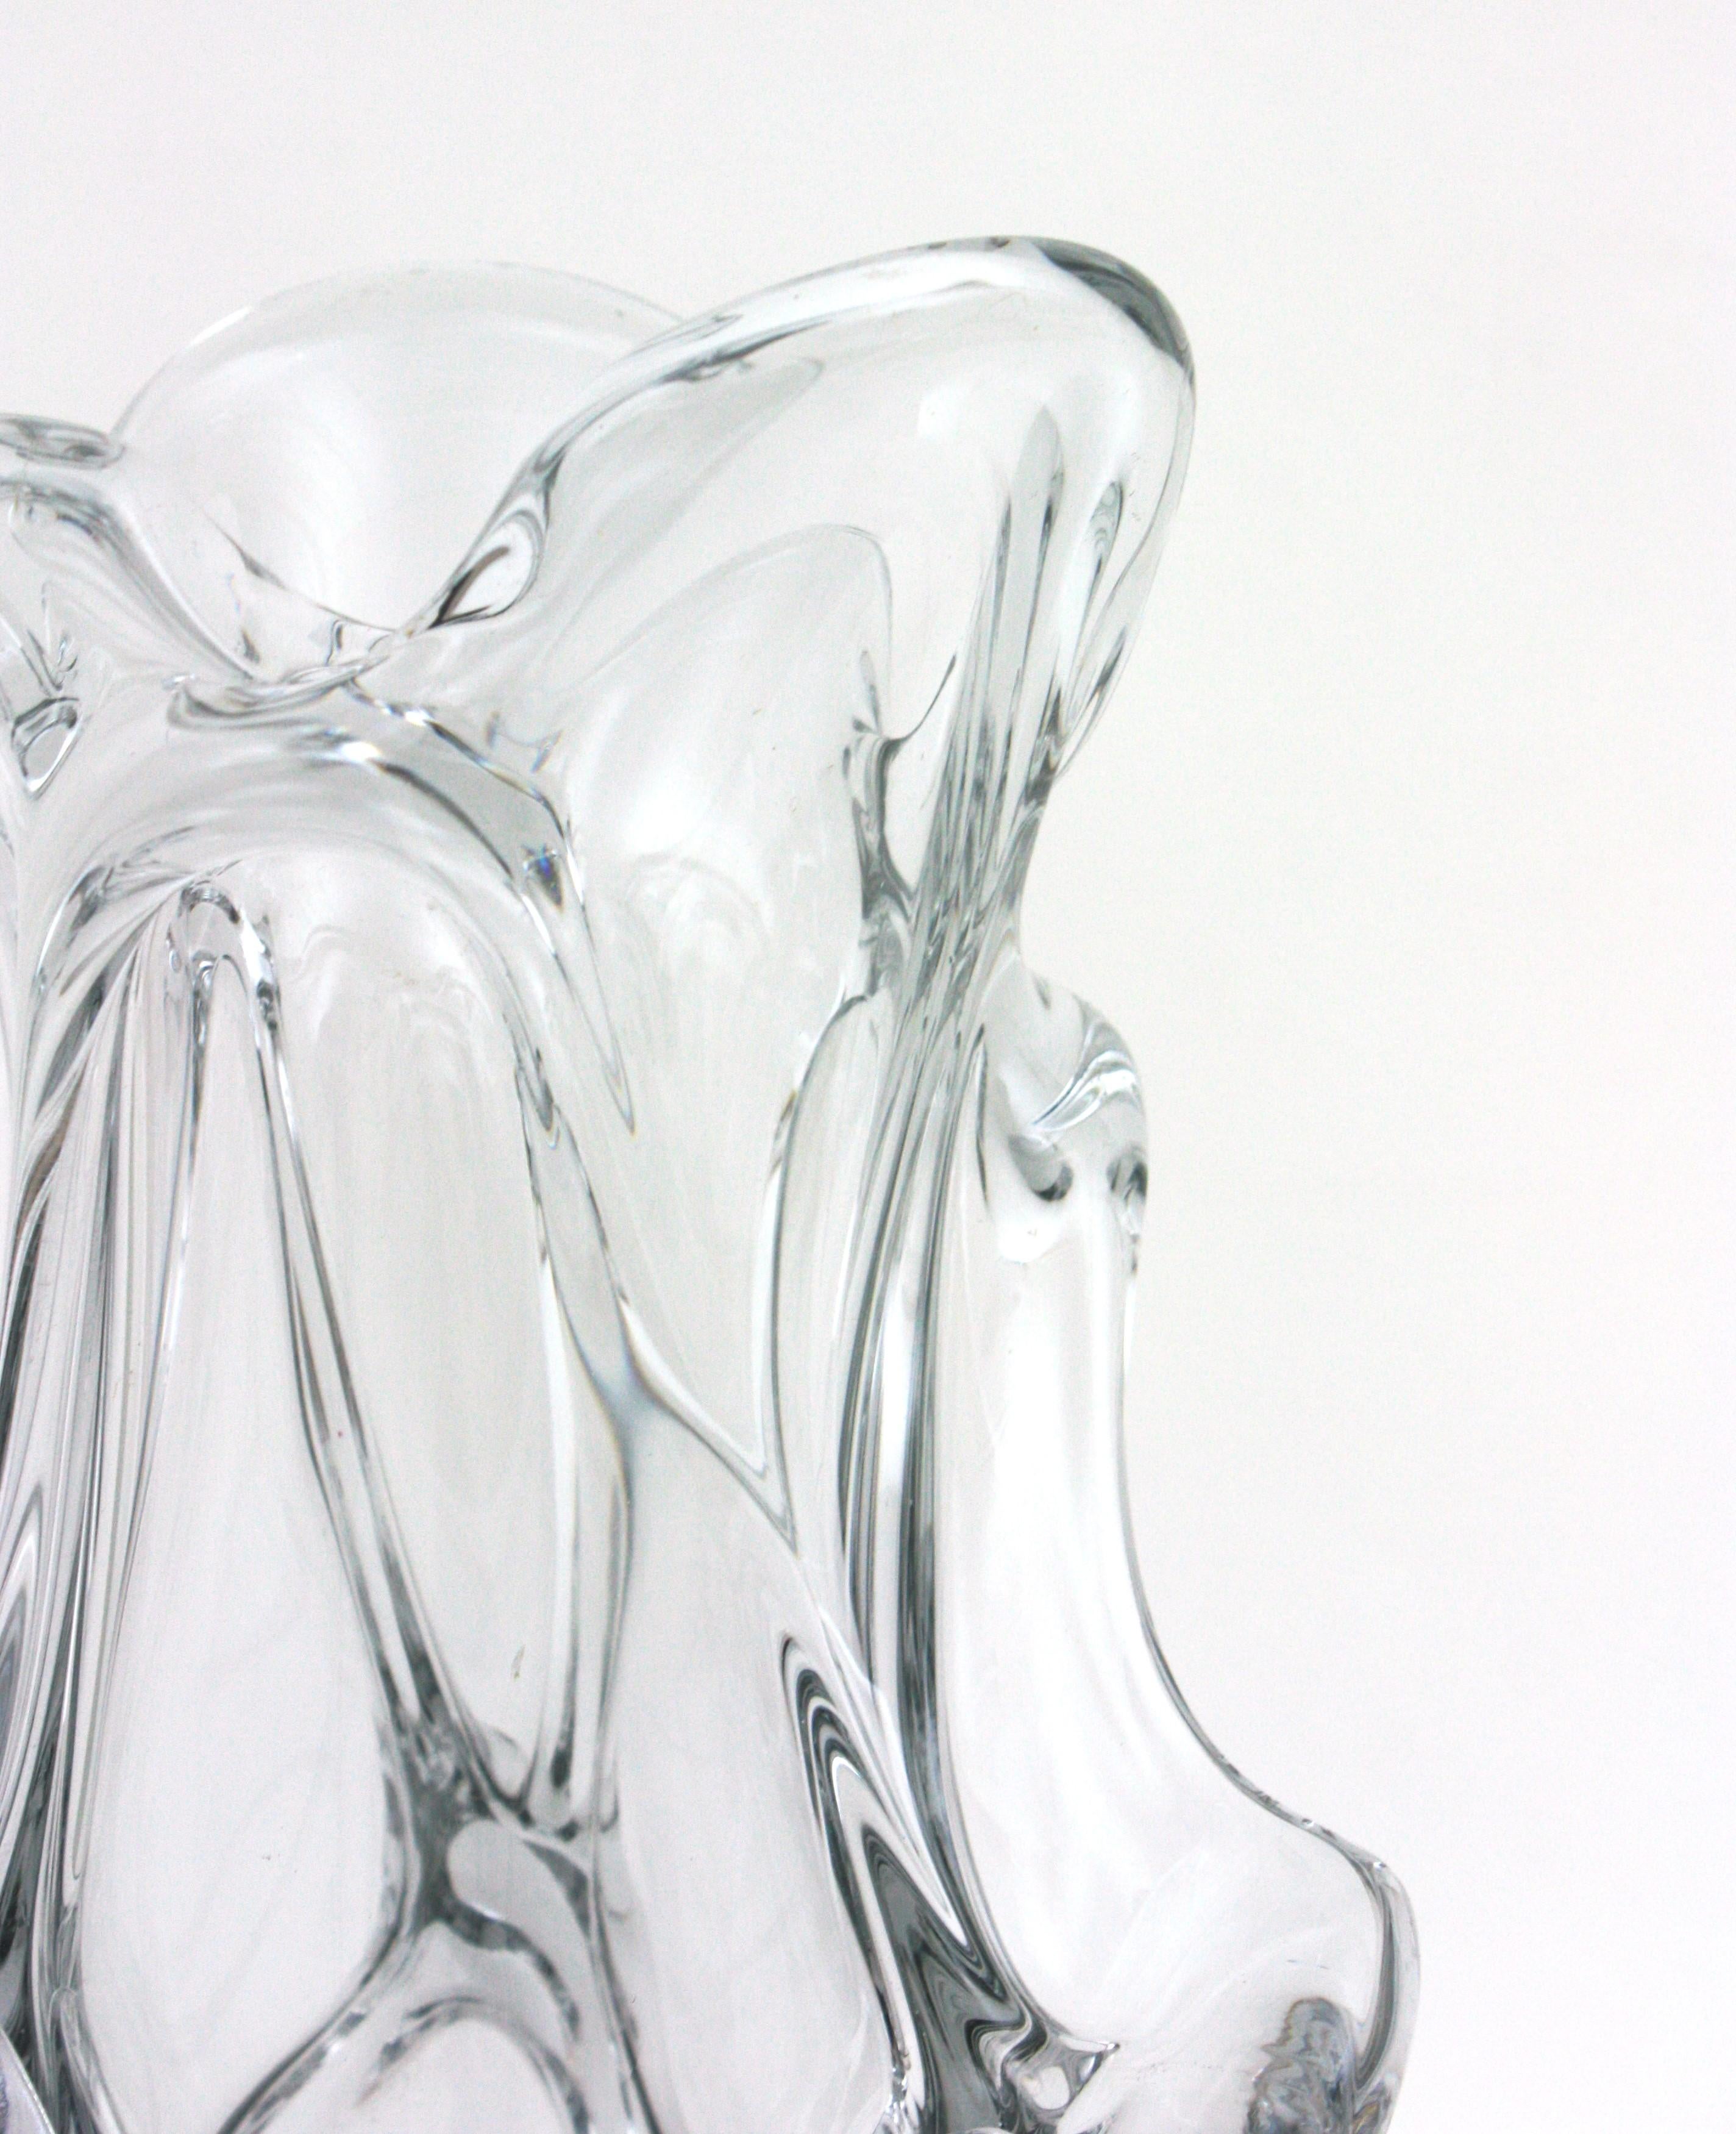 Large Murano Organic Shaped Vase in Clear Glass, 1950s For Sale 7